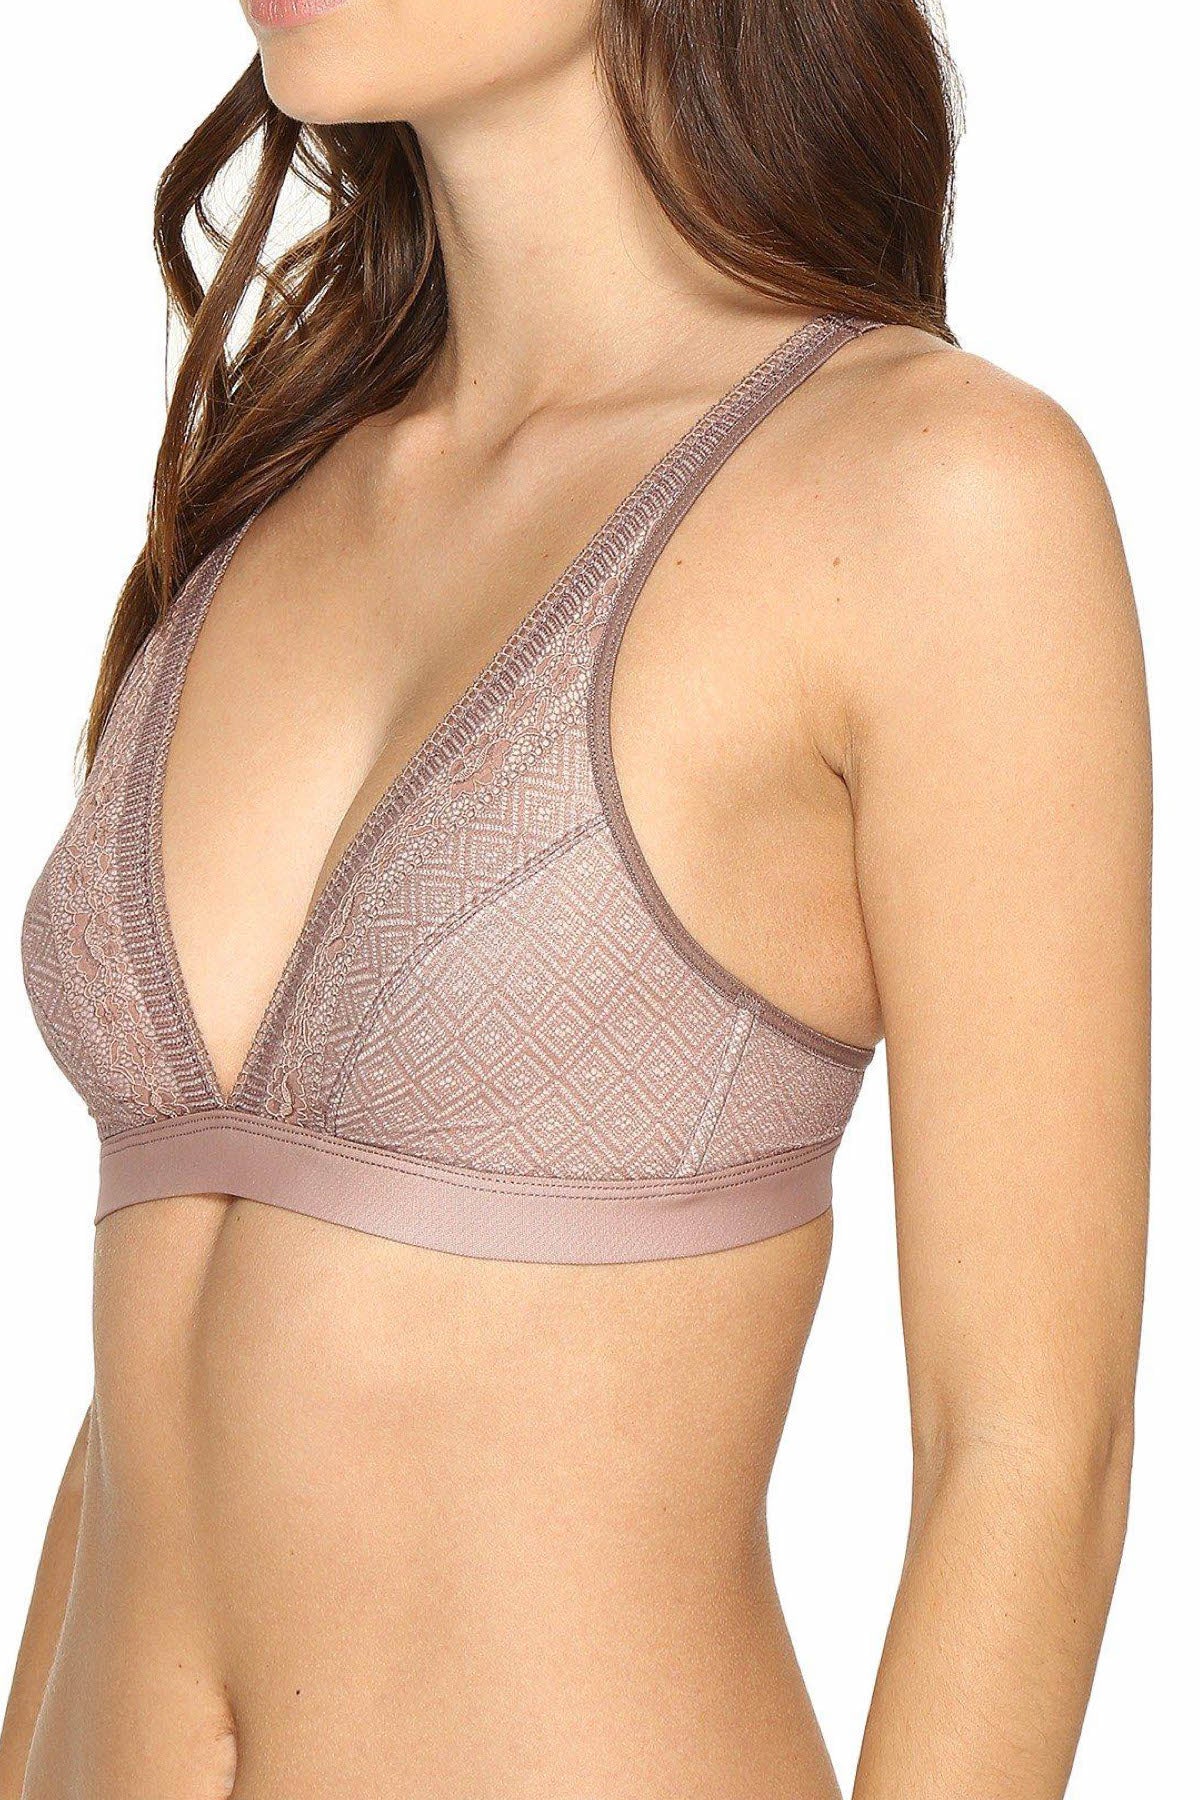 b.tempt'd Taupe-Rose/Smoke-Nude V-Neck Lace Bralette